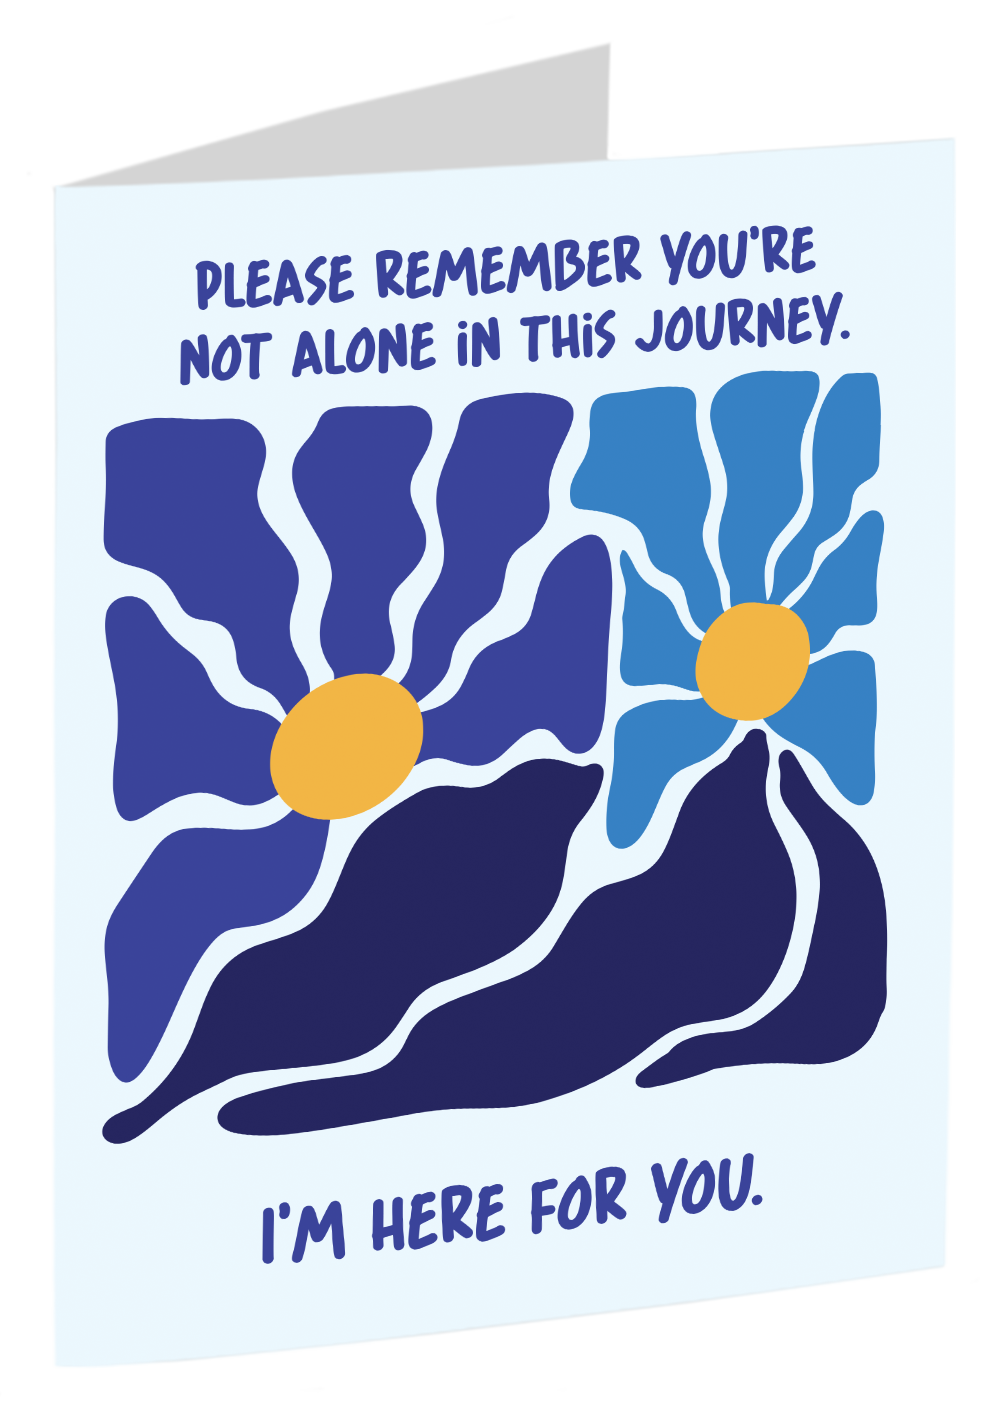 "I'm Here For You" - A Card To Help People With Depression Feel More Supported And Less Alone